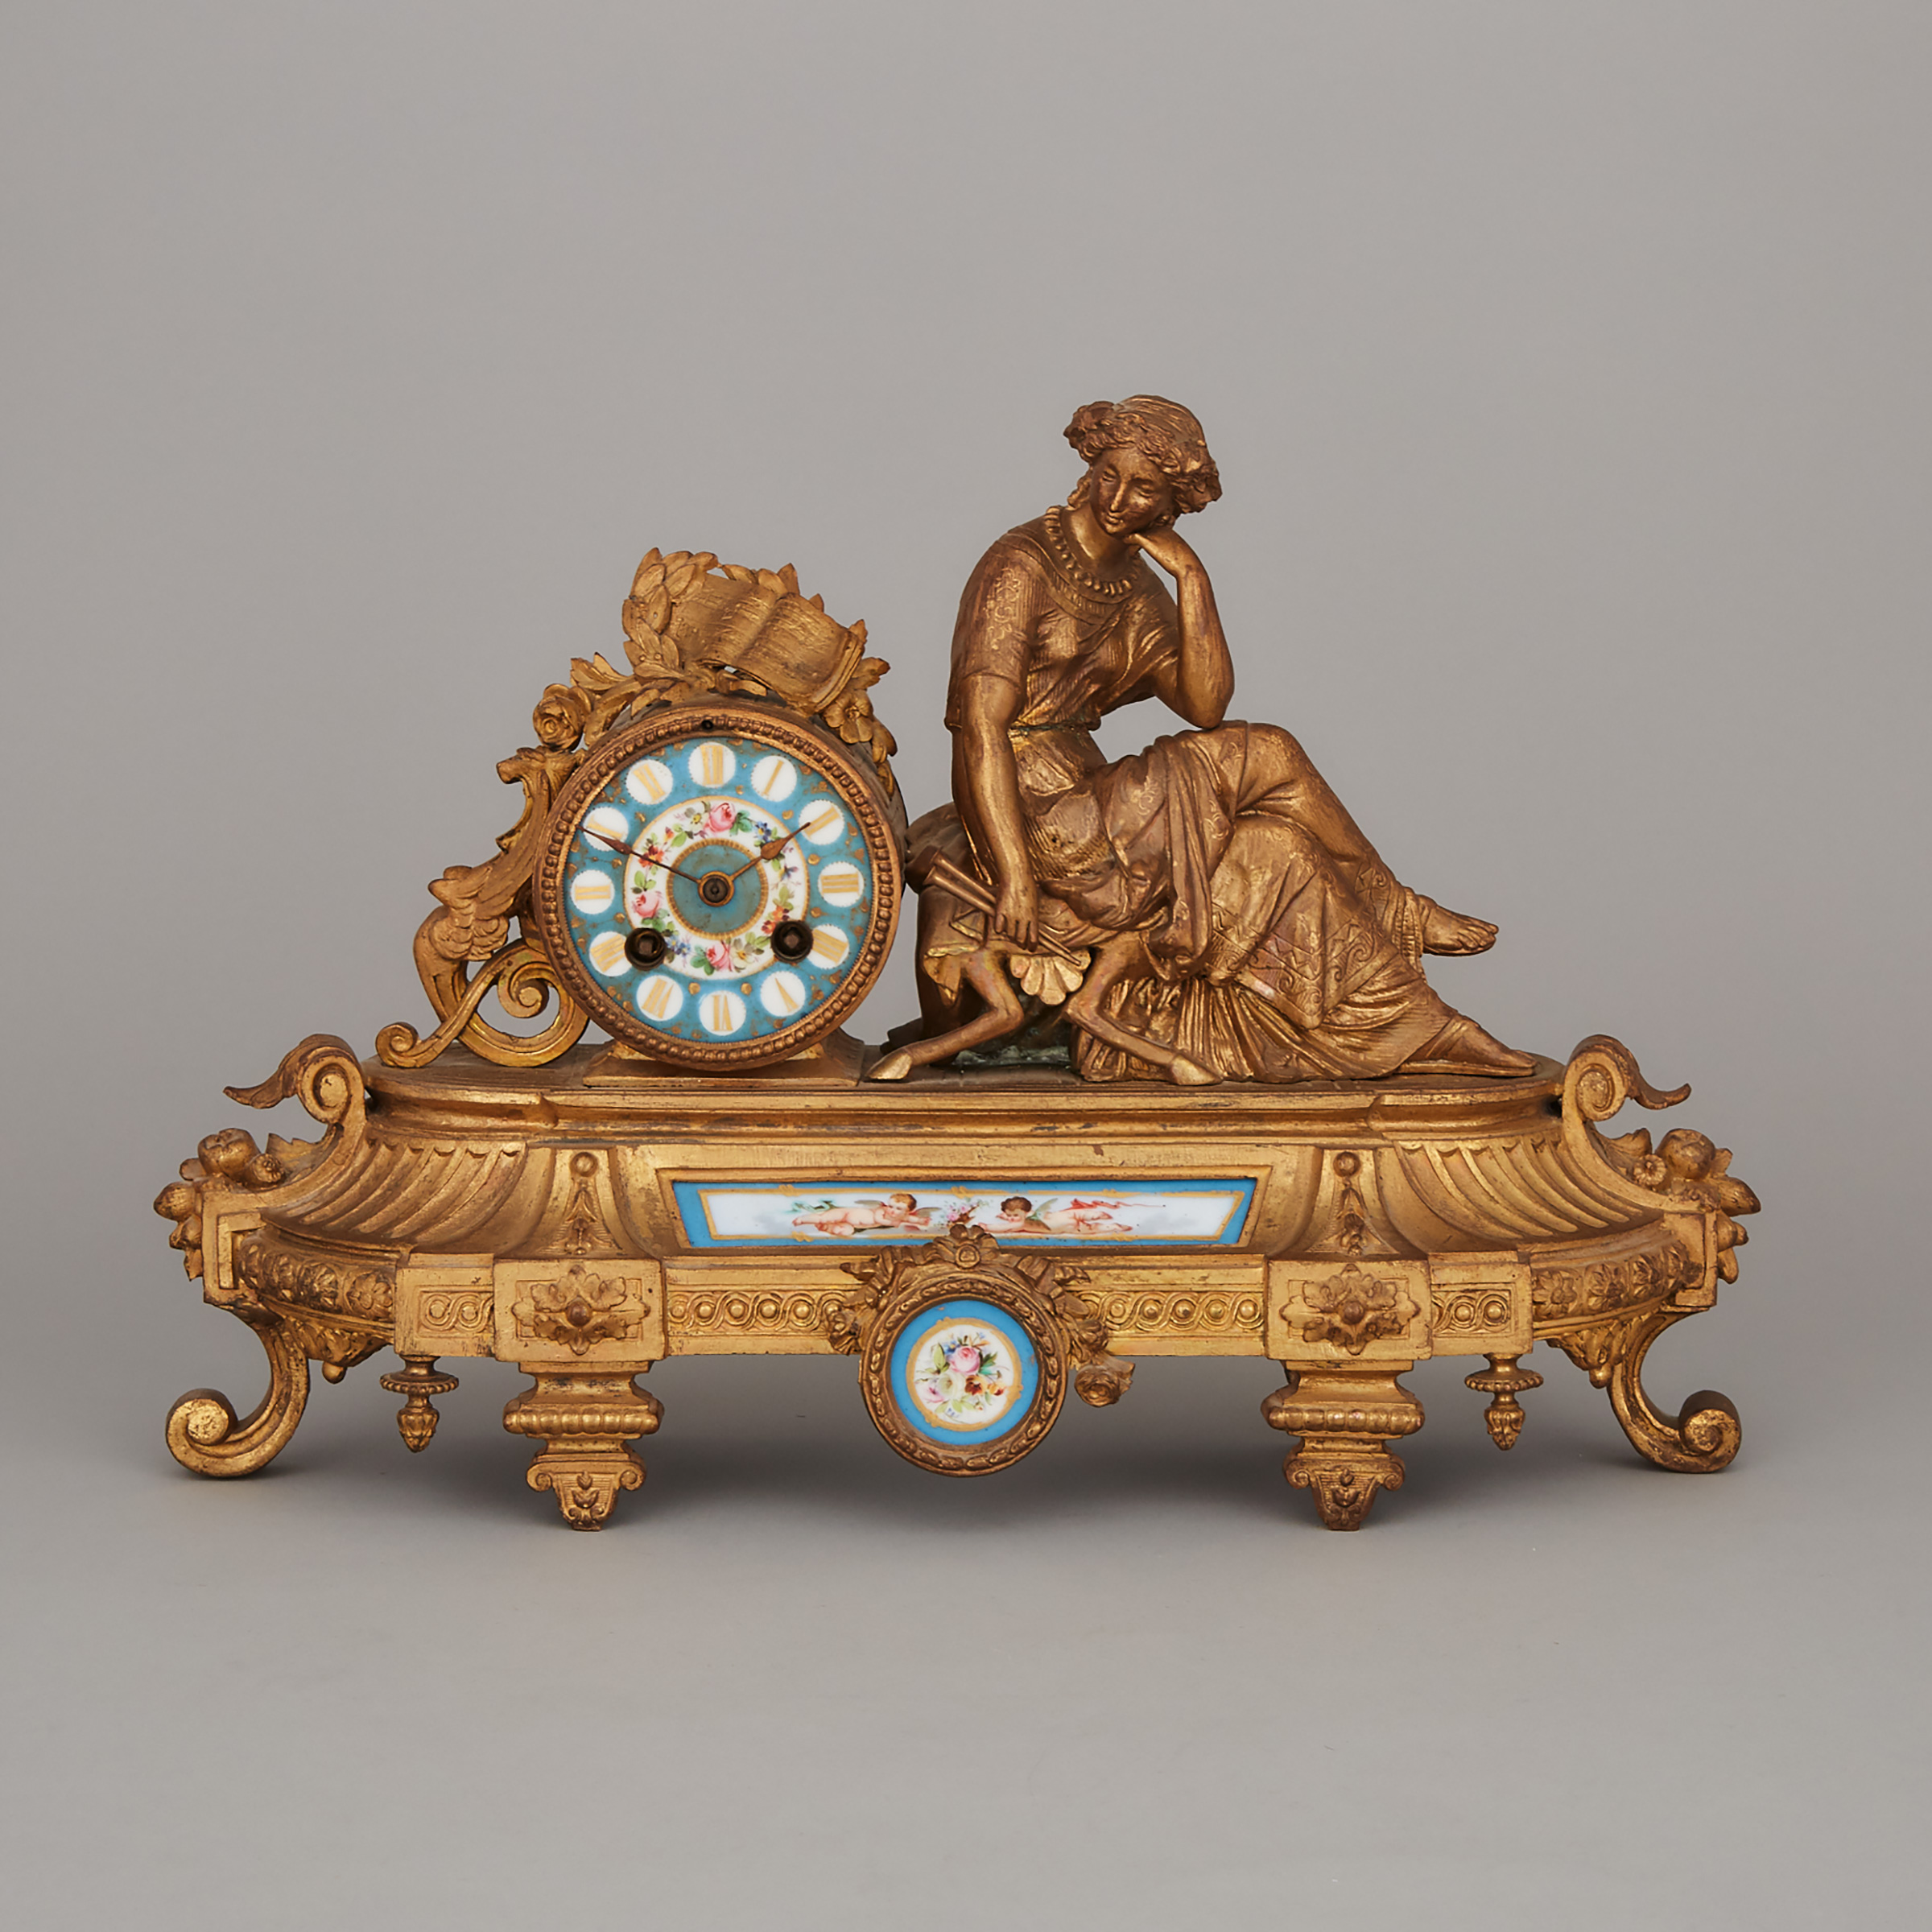 French 'Sevres' Style Porcelain Mounted Gilt Metal Figural Mantel Clock, c.1890